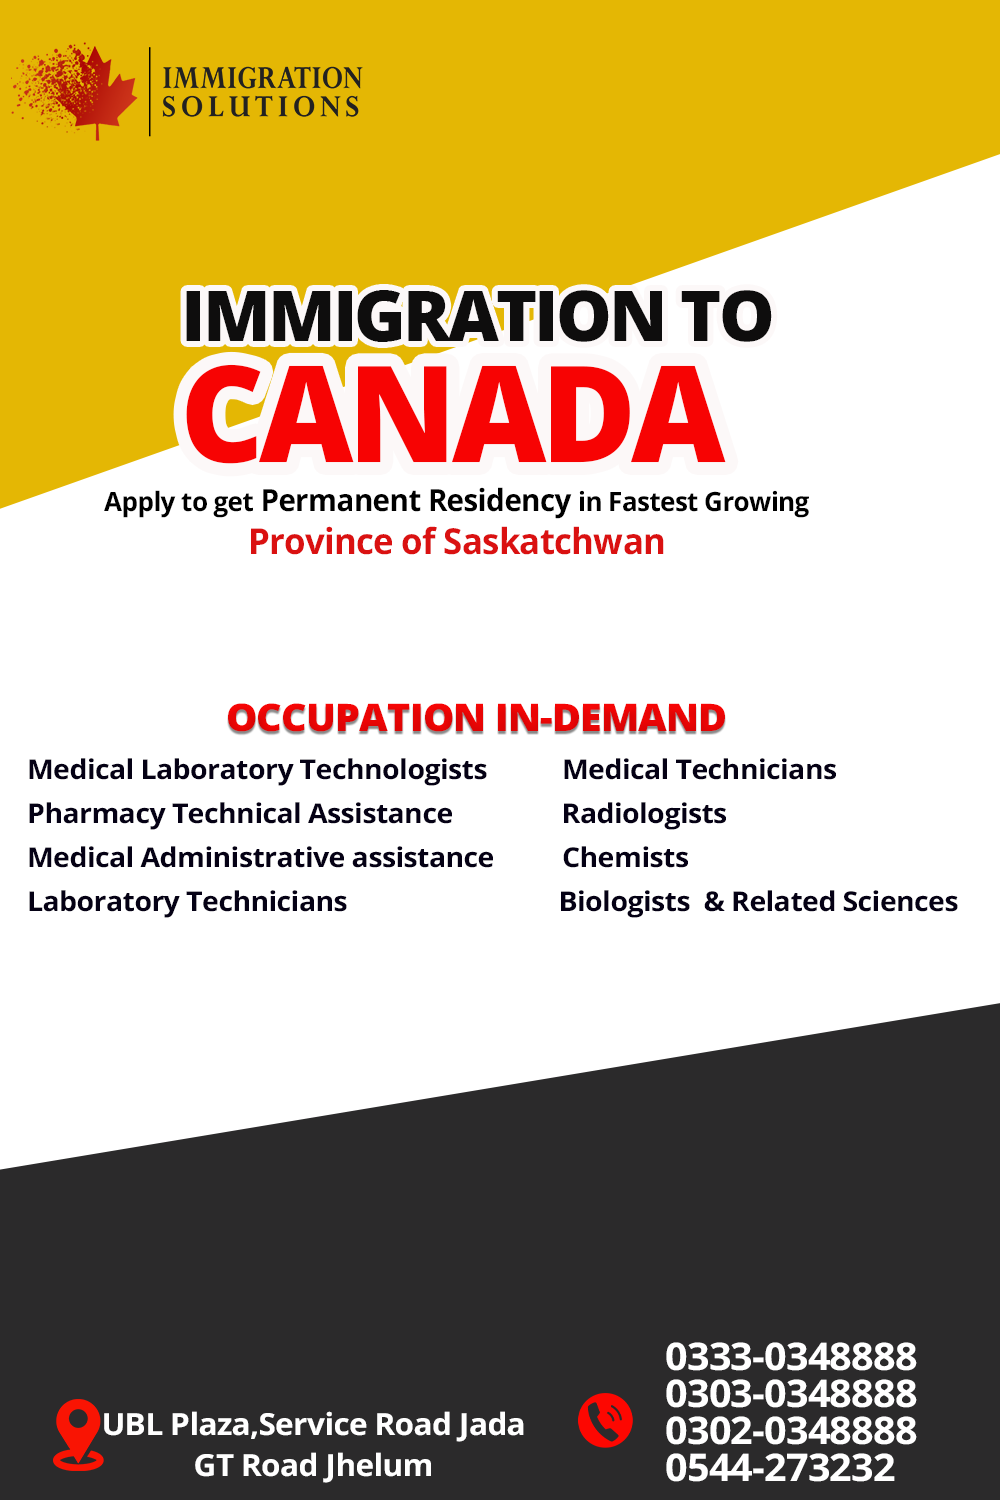 Immigration post for canada| New post design ideas pinterest preview image.